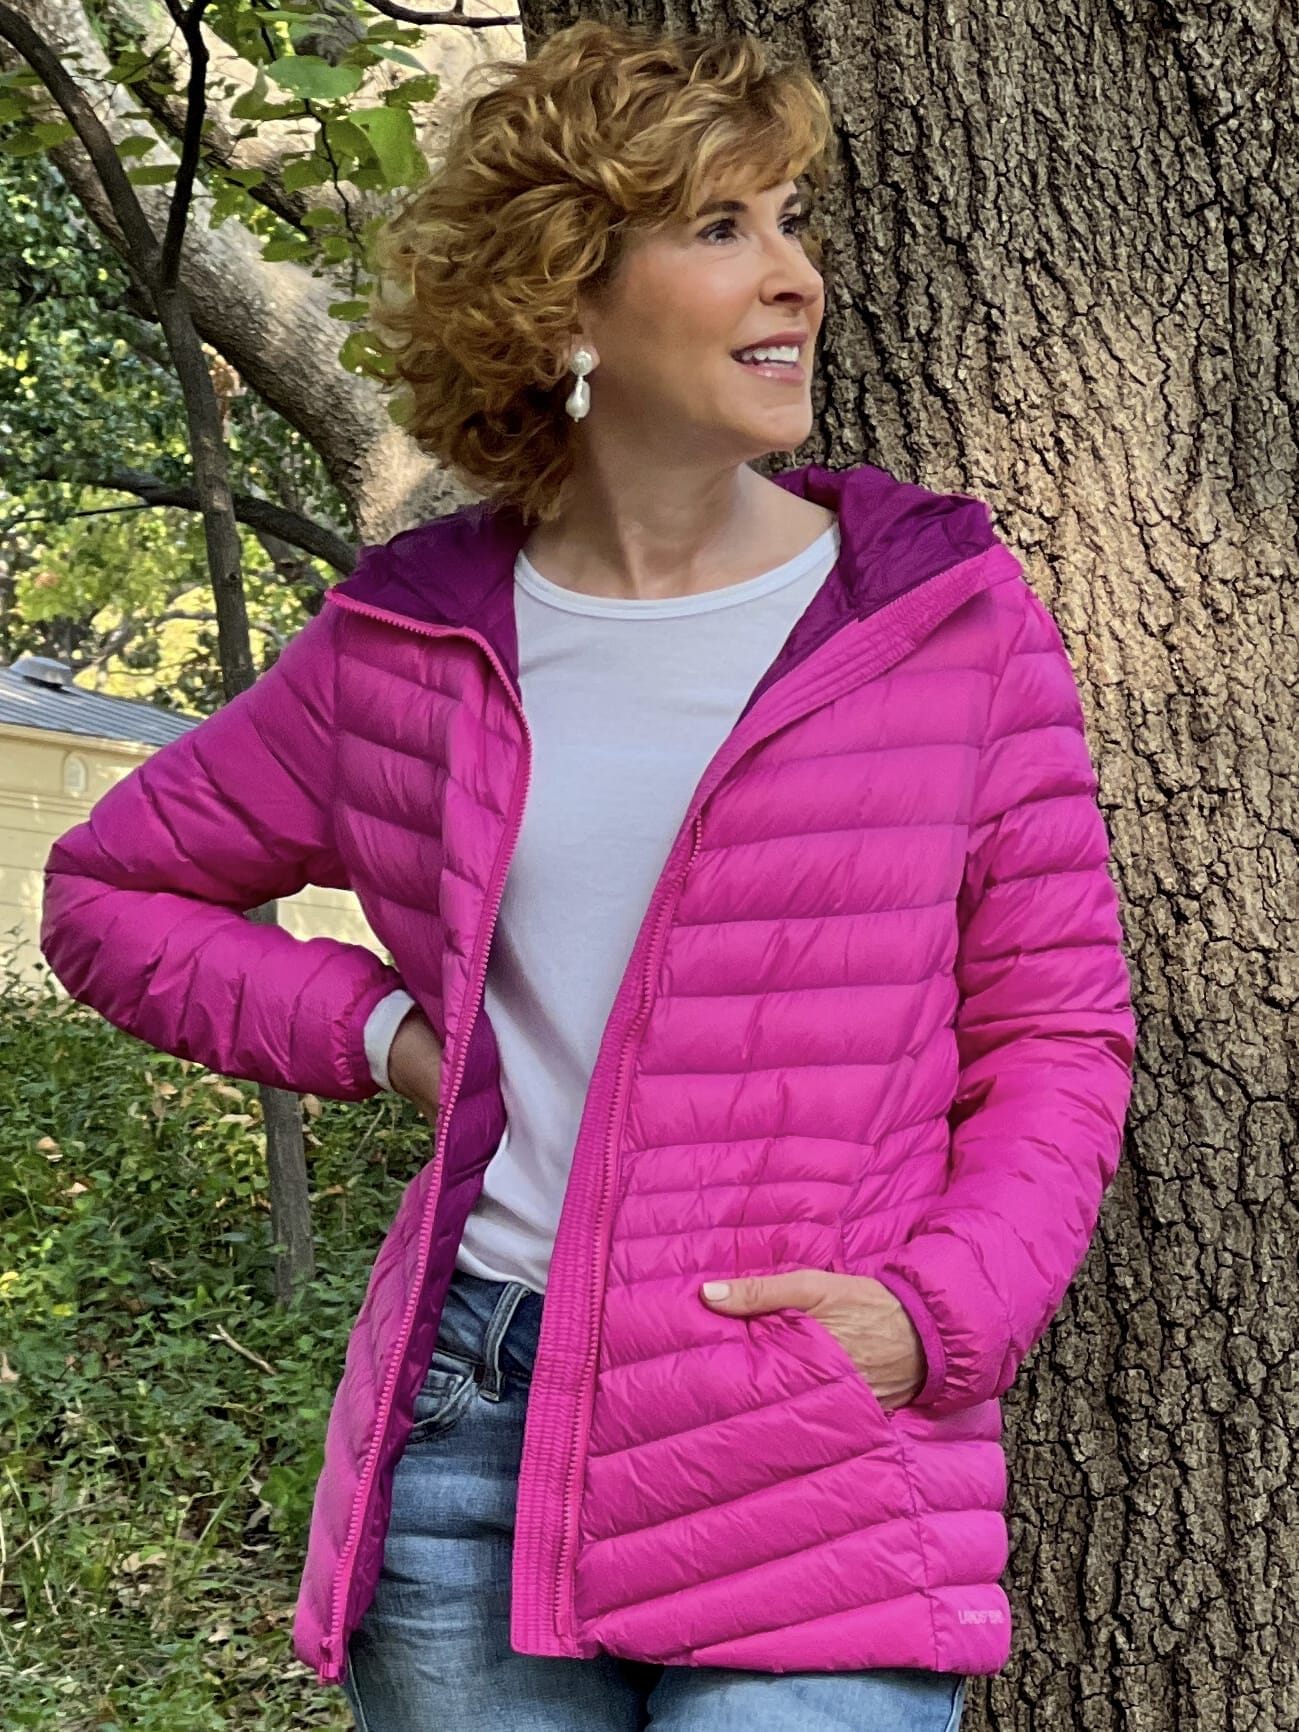 woman wearing land's end Ultralight Packable Down Jacket in hot pink and cropped jeans with hot pink sneakers standing by a tree in the park